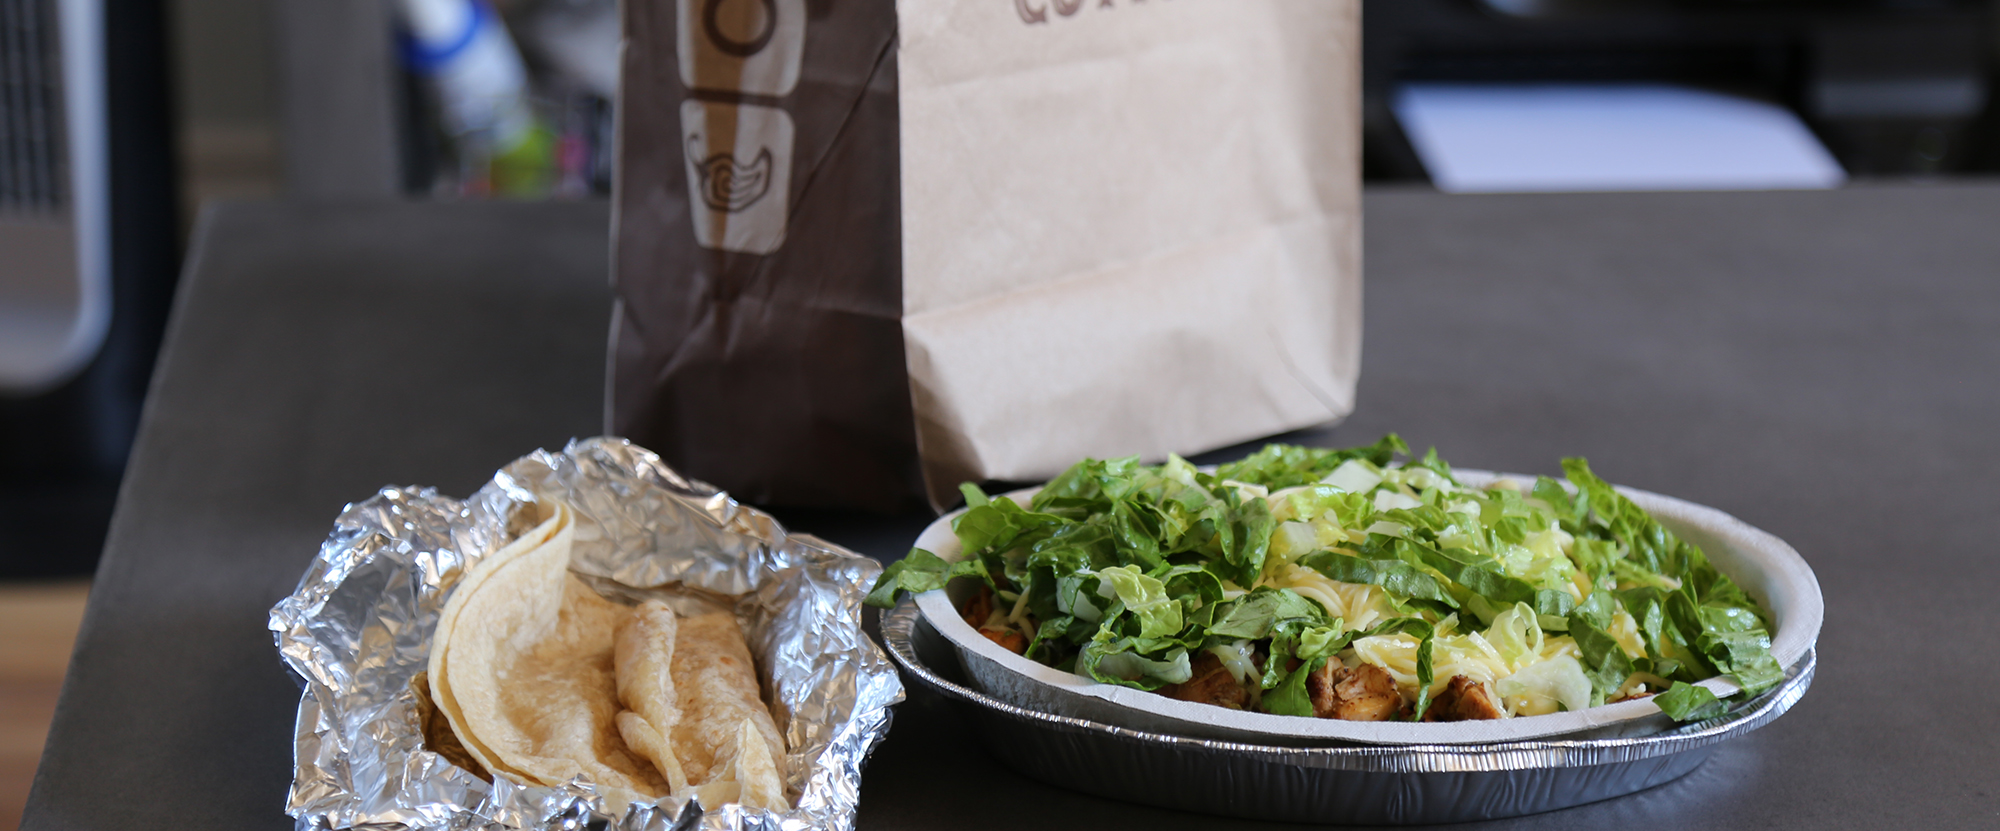 How Paid Search is Just Like Chipotle - Tower33